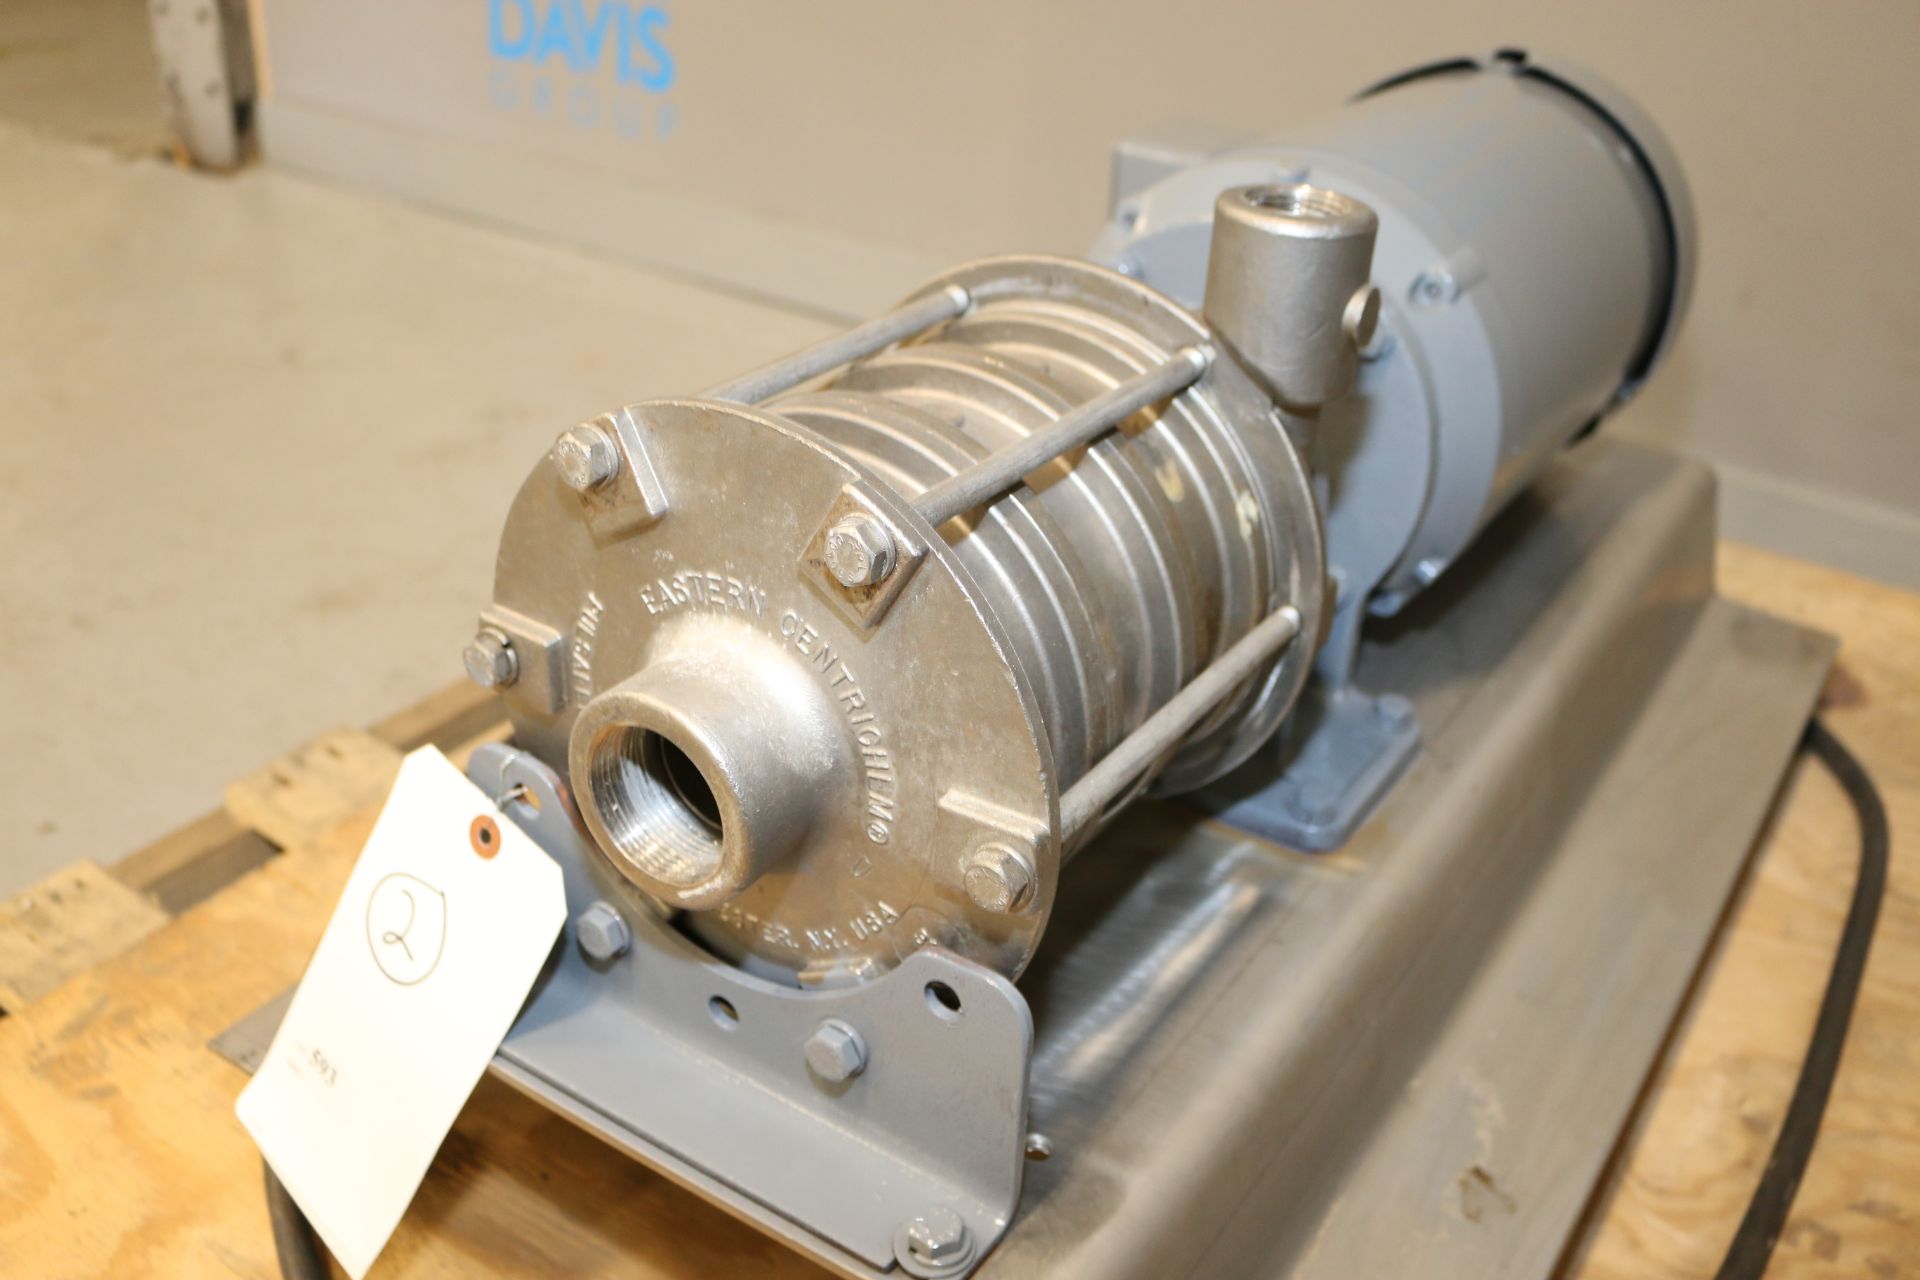 Eastern Centrichem 5 hp Pump, M/N ECH4-ASKFENSS, with Thread Type Inlet/Outlet, with Baldor 3450 RPM - Image 7 of 11